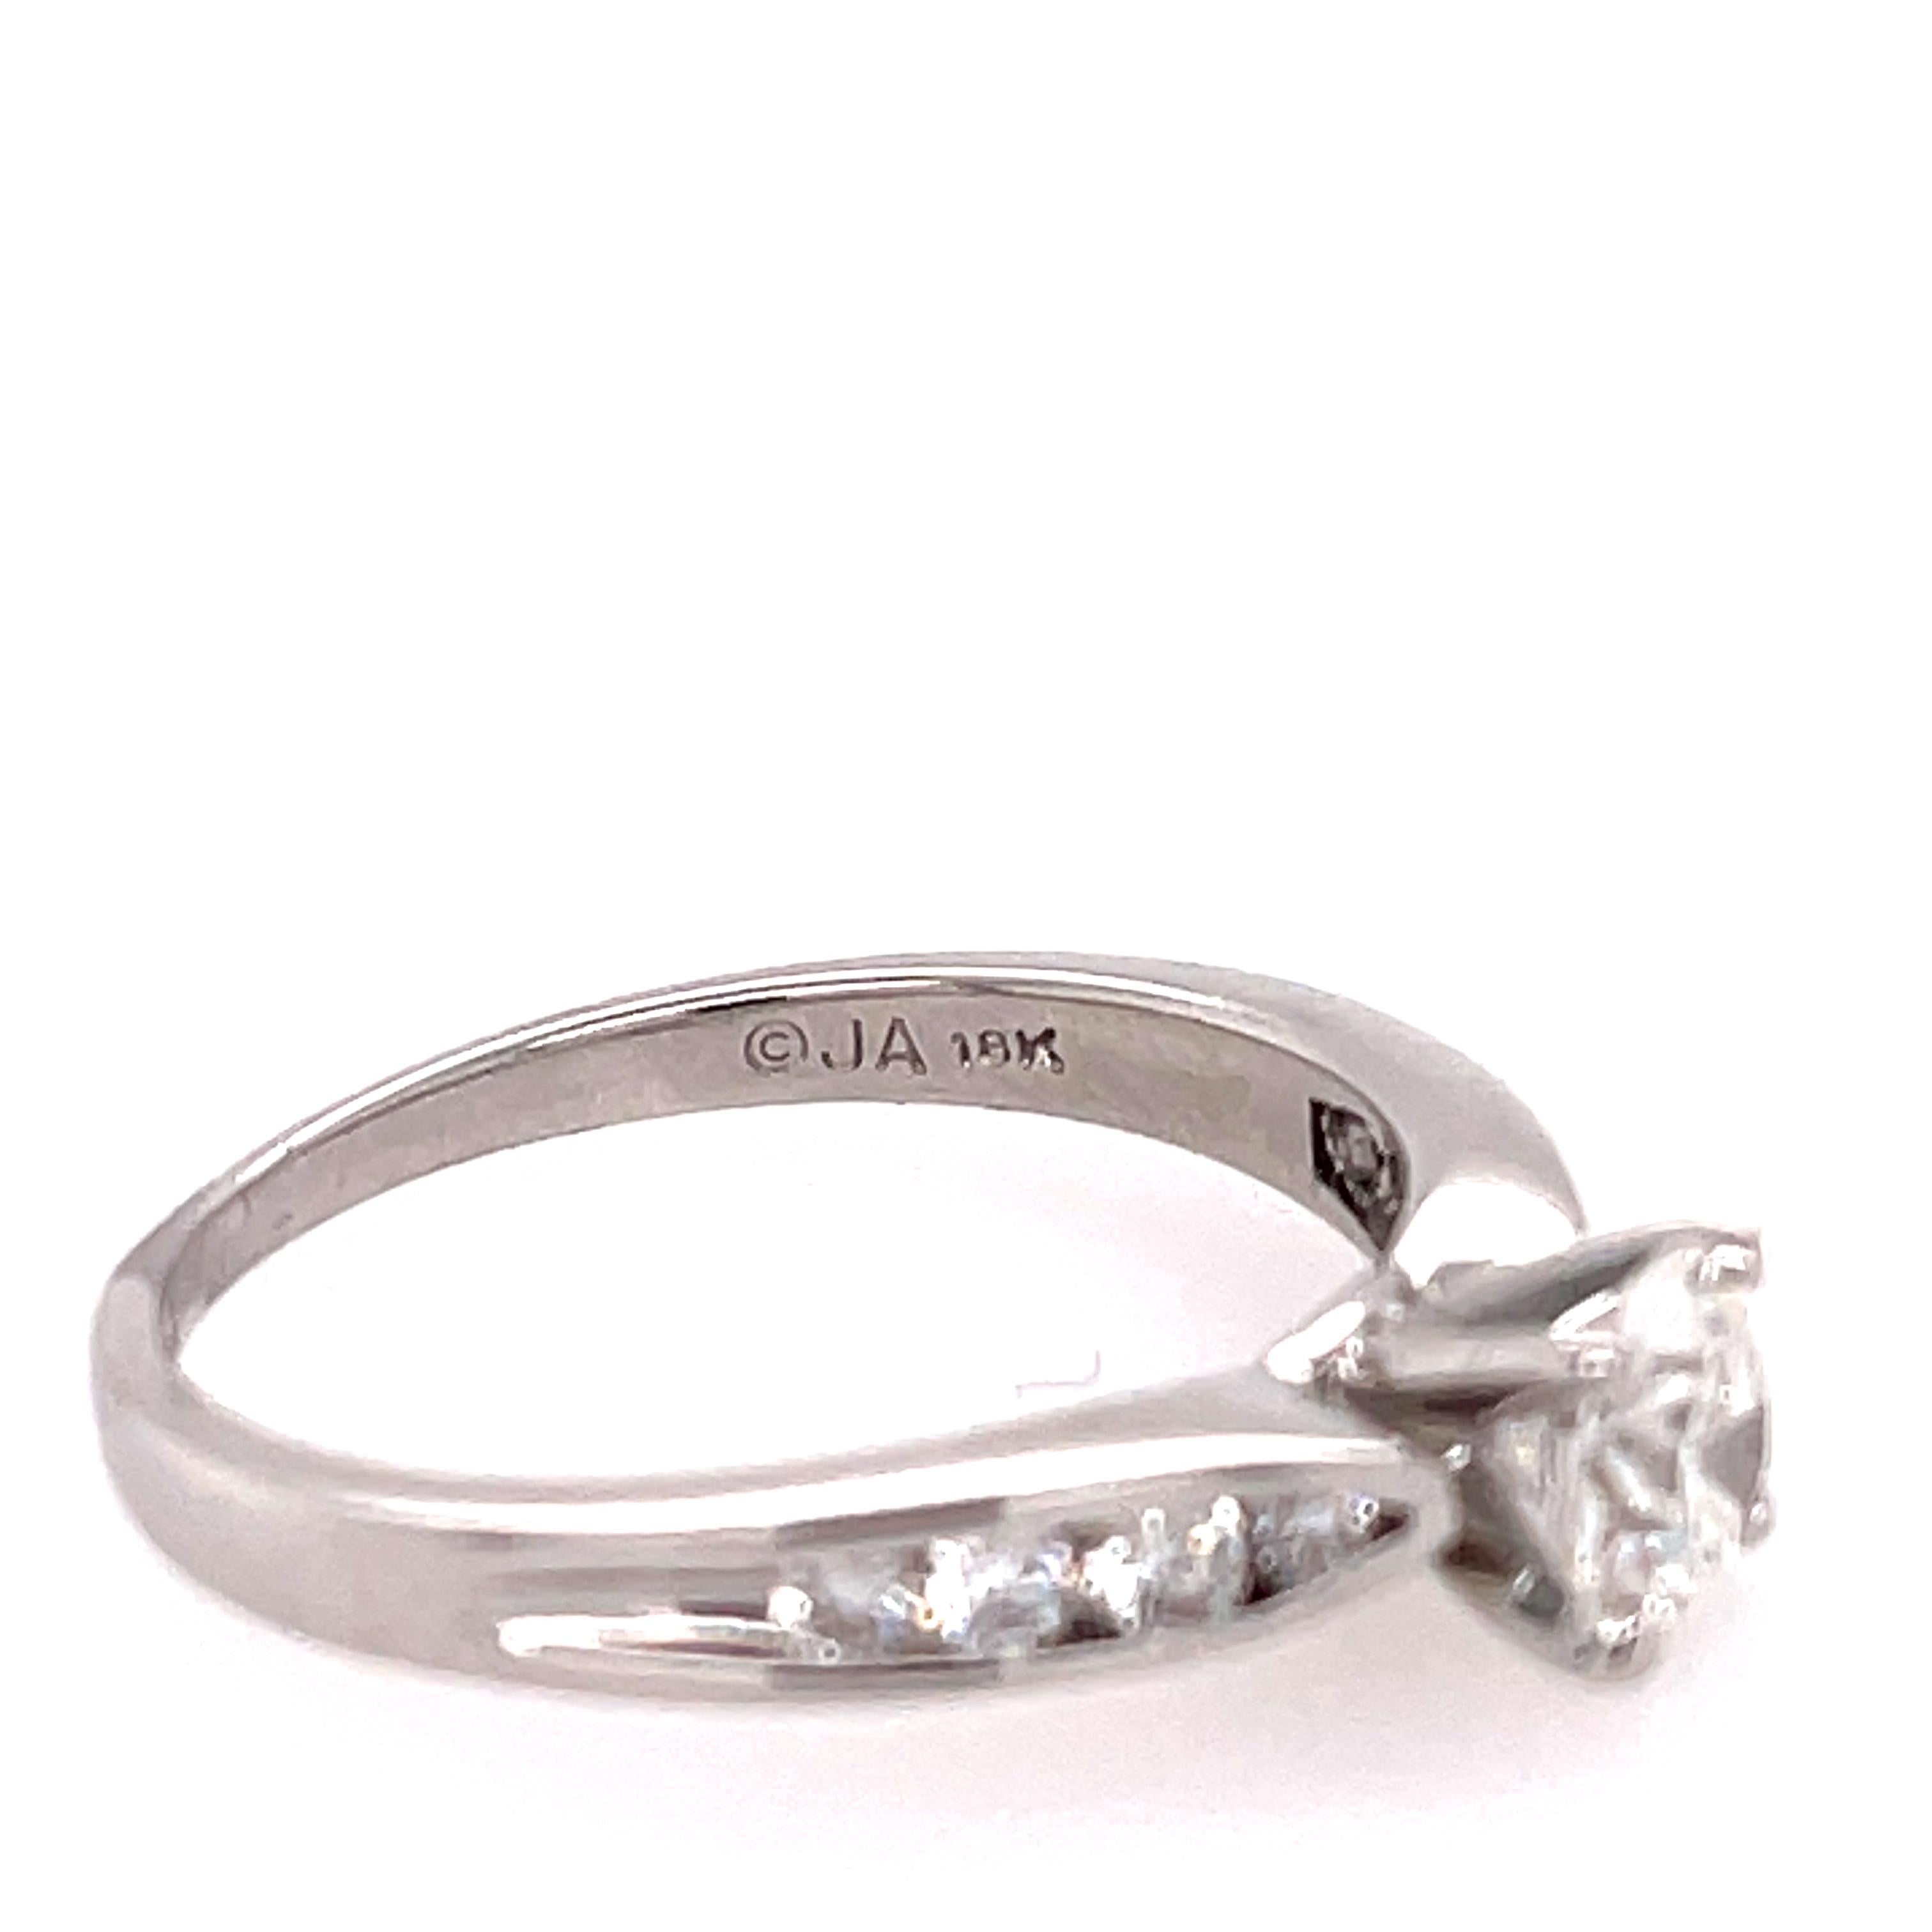 Diamond engagement ring in 18K white gold. The ring features a 0.72ct brilliant round center and 8 channel set diamonds on the side. Stamped JA 14K.  